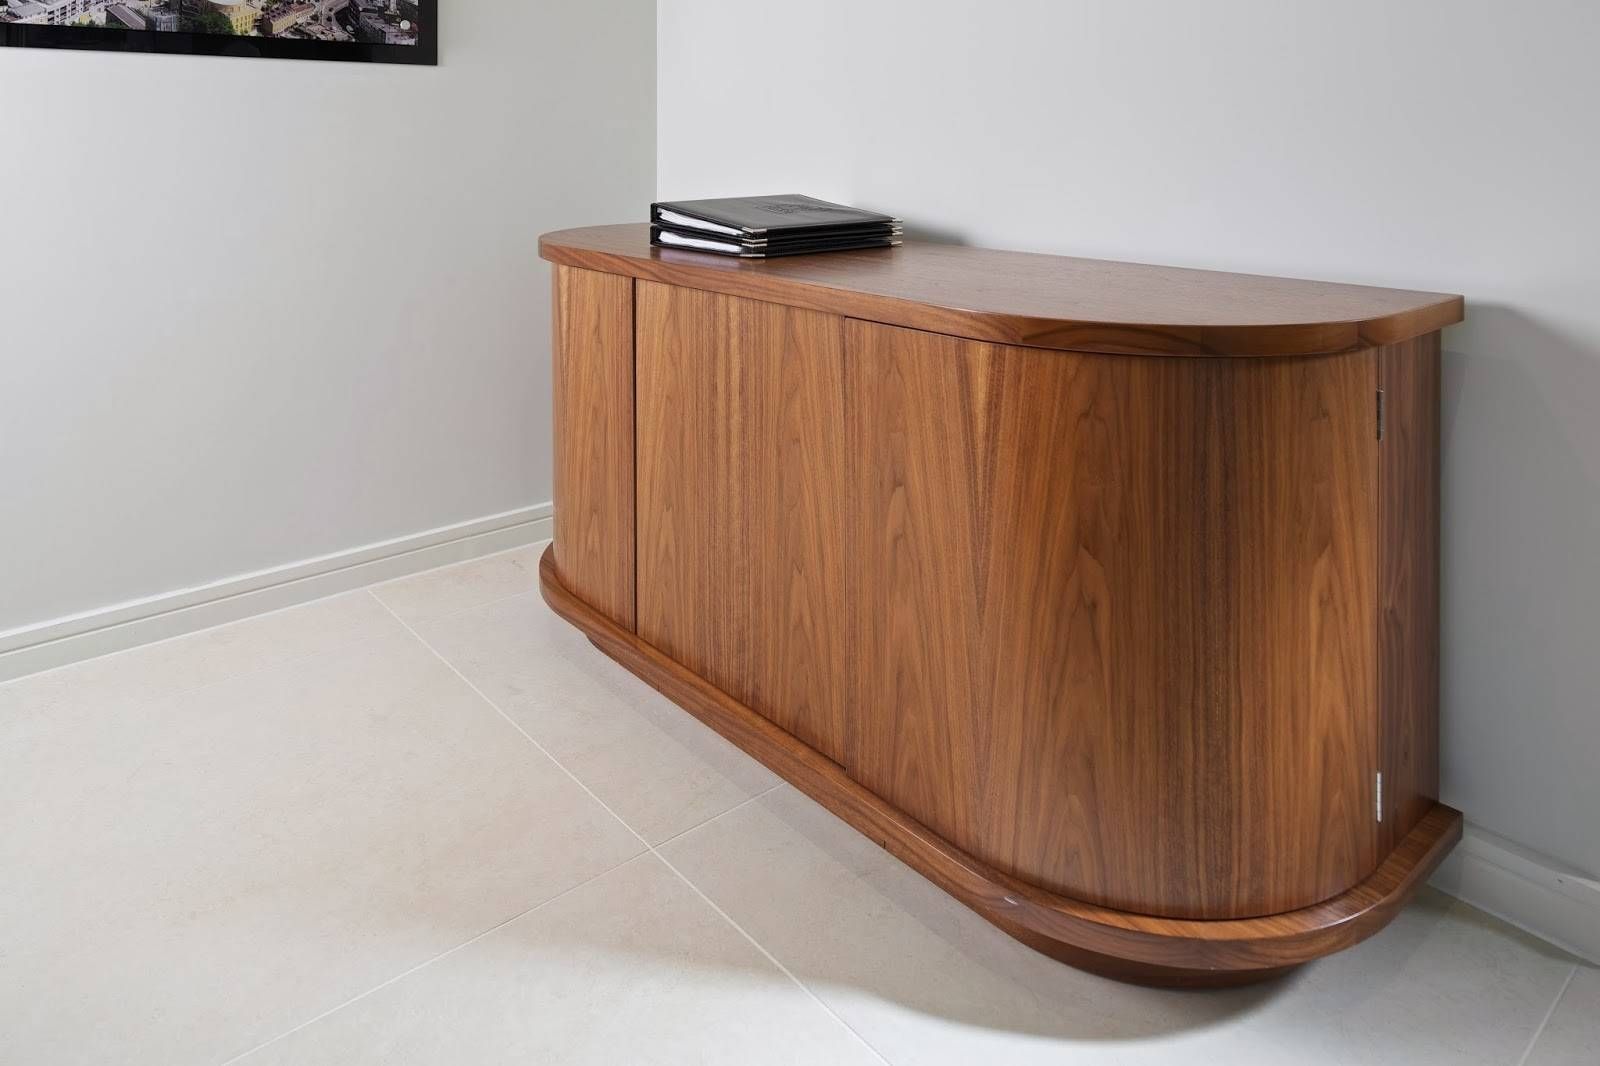 Gerard Lewis Designs Intended For Curved Sideboard (View 7 of 20)